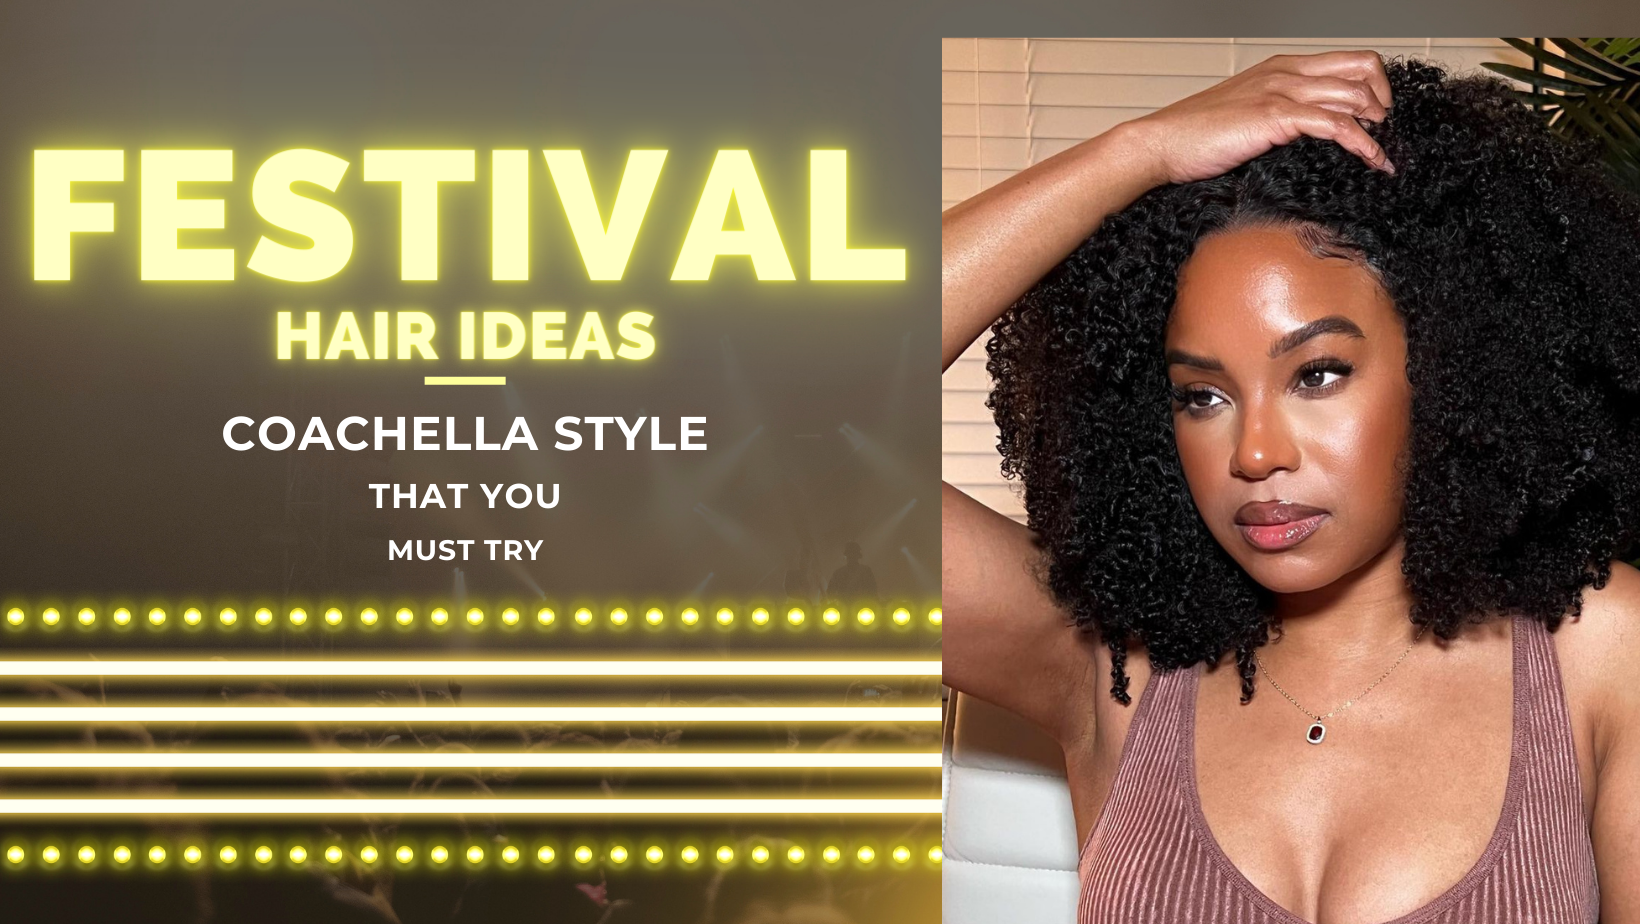 Black Hair Idea For Festivals | Coachella Style That You Must Try!